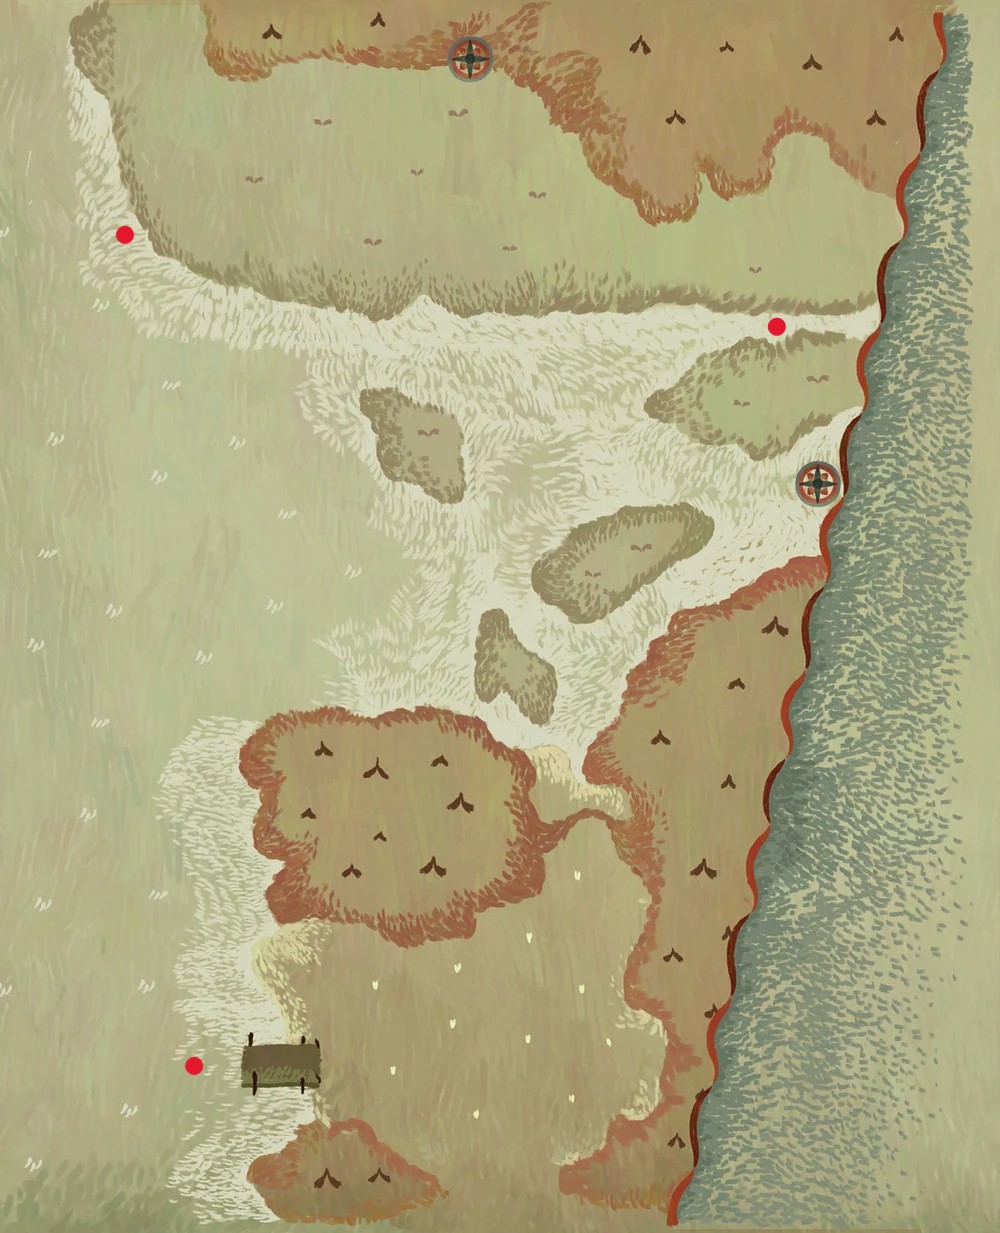 Book of Travels - Fishing Map Location - Fishing Map - 275D1E1